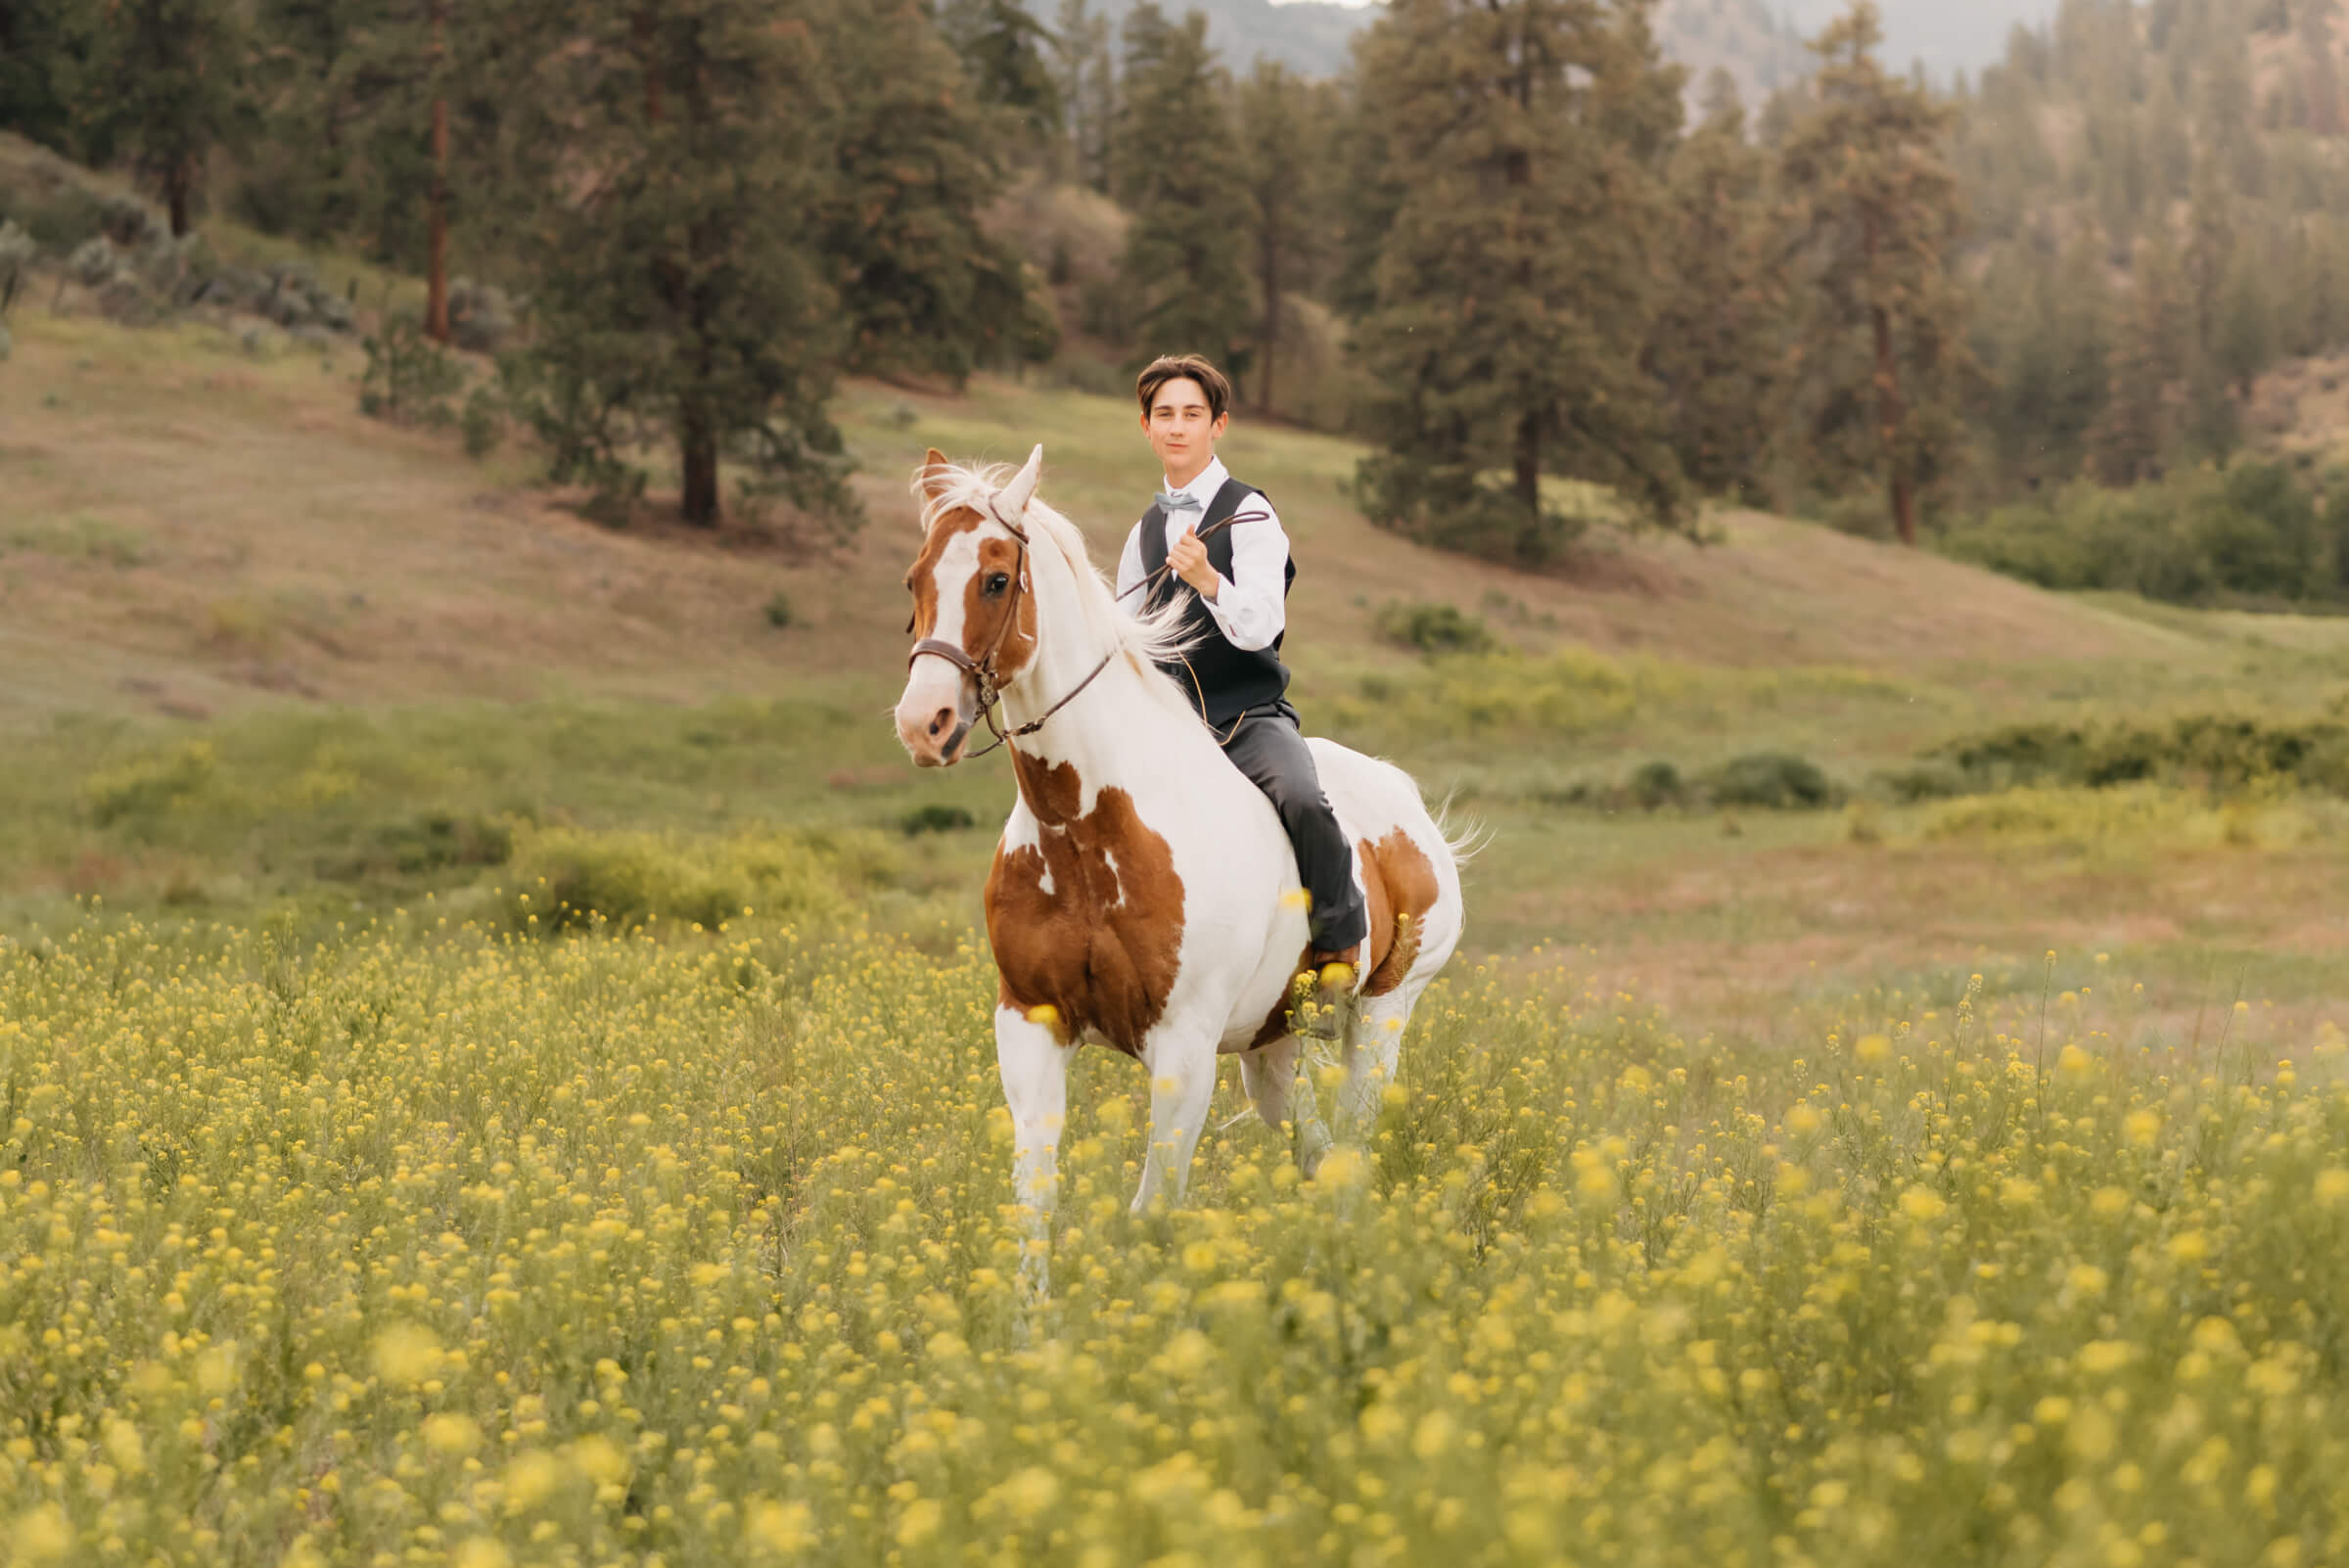 teenage boy riding horse through a field. horse benefits from Kelowna equine bodywork therapy